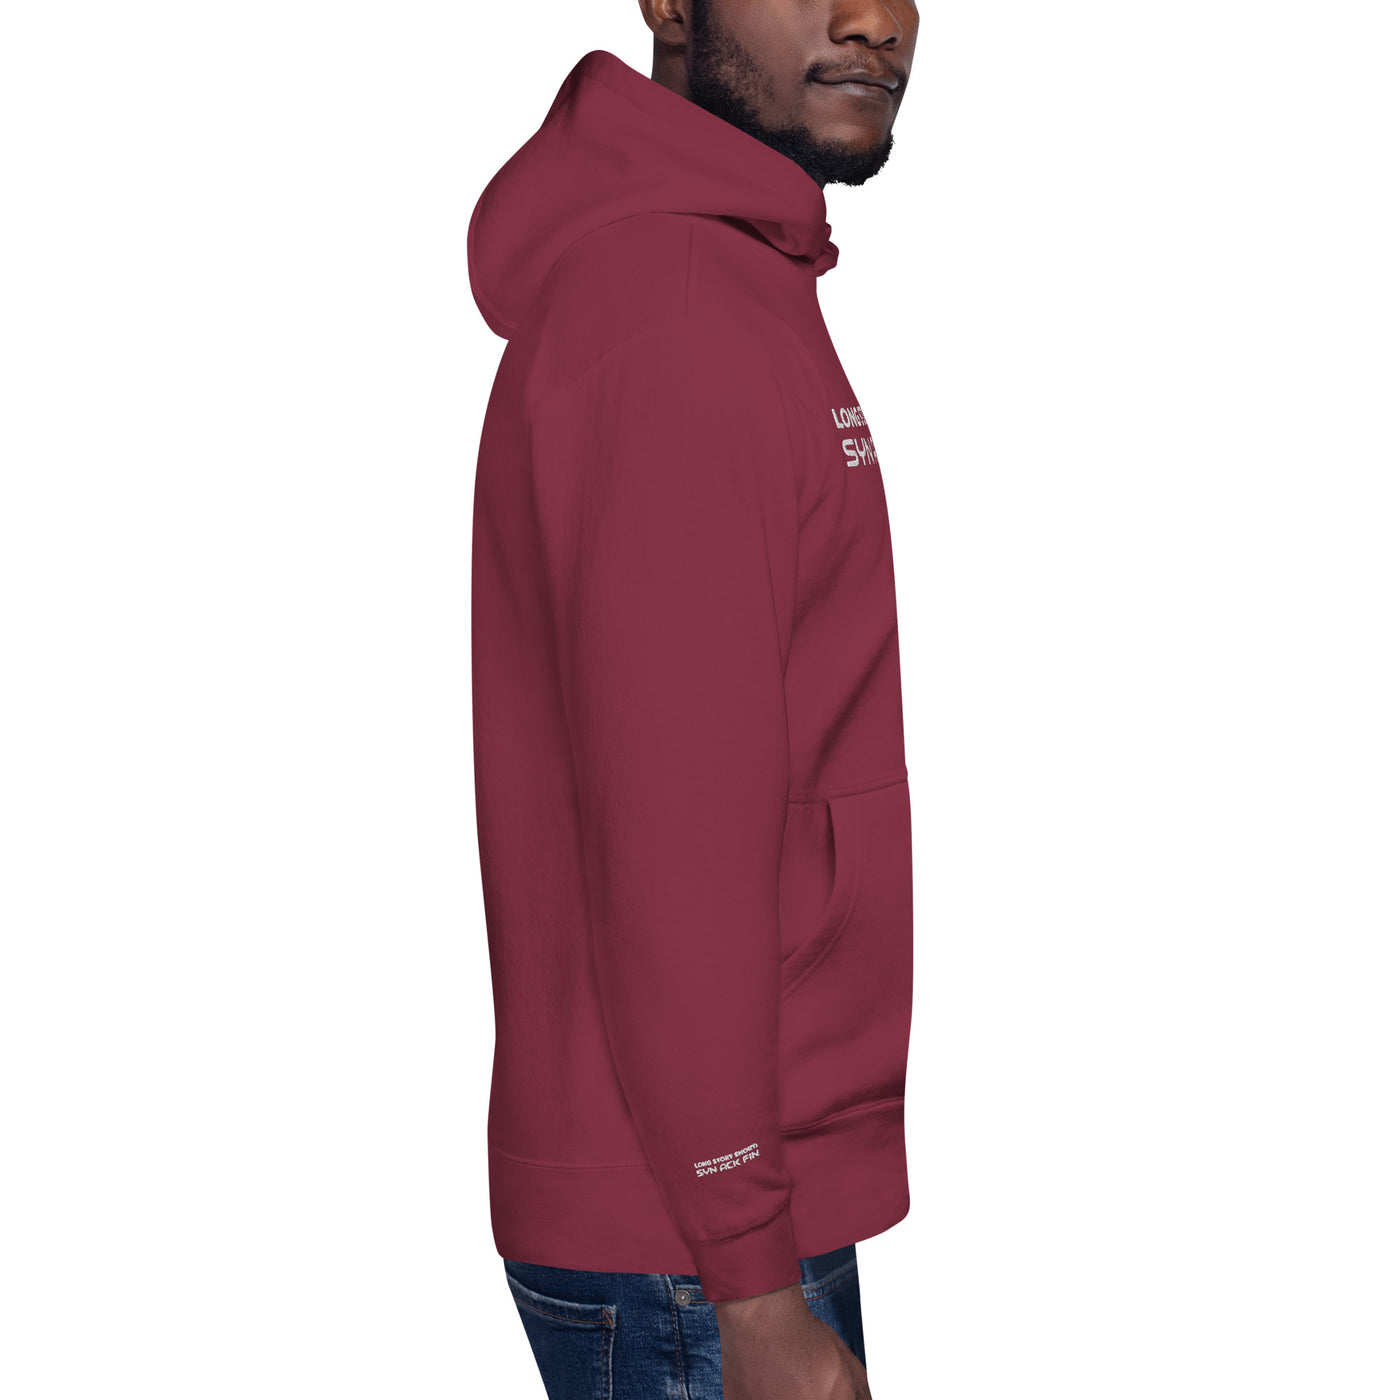 Long story short - Syn Ack Fin - Unisex Hoodie (Embroidery)